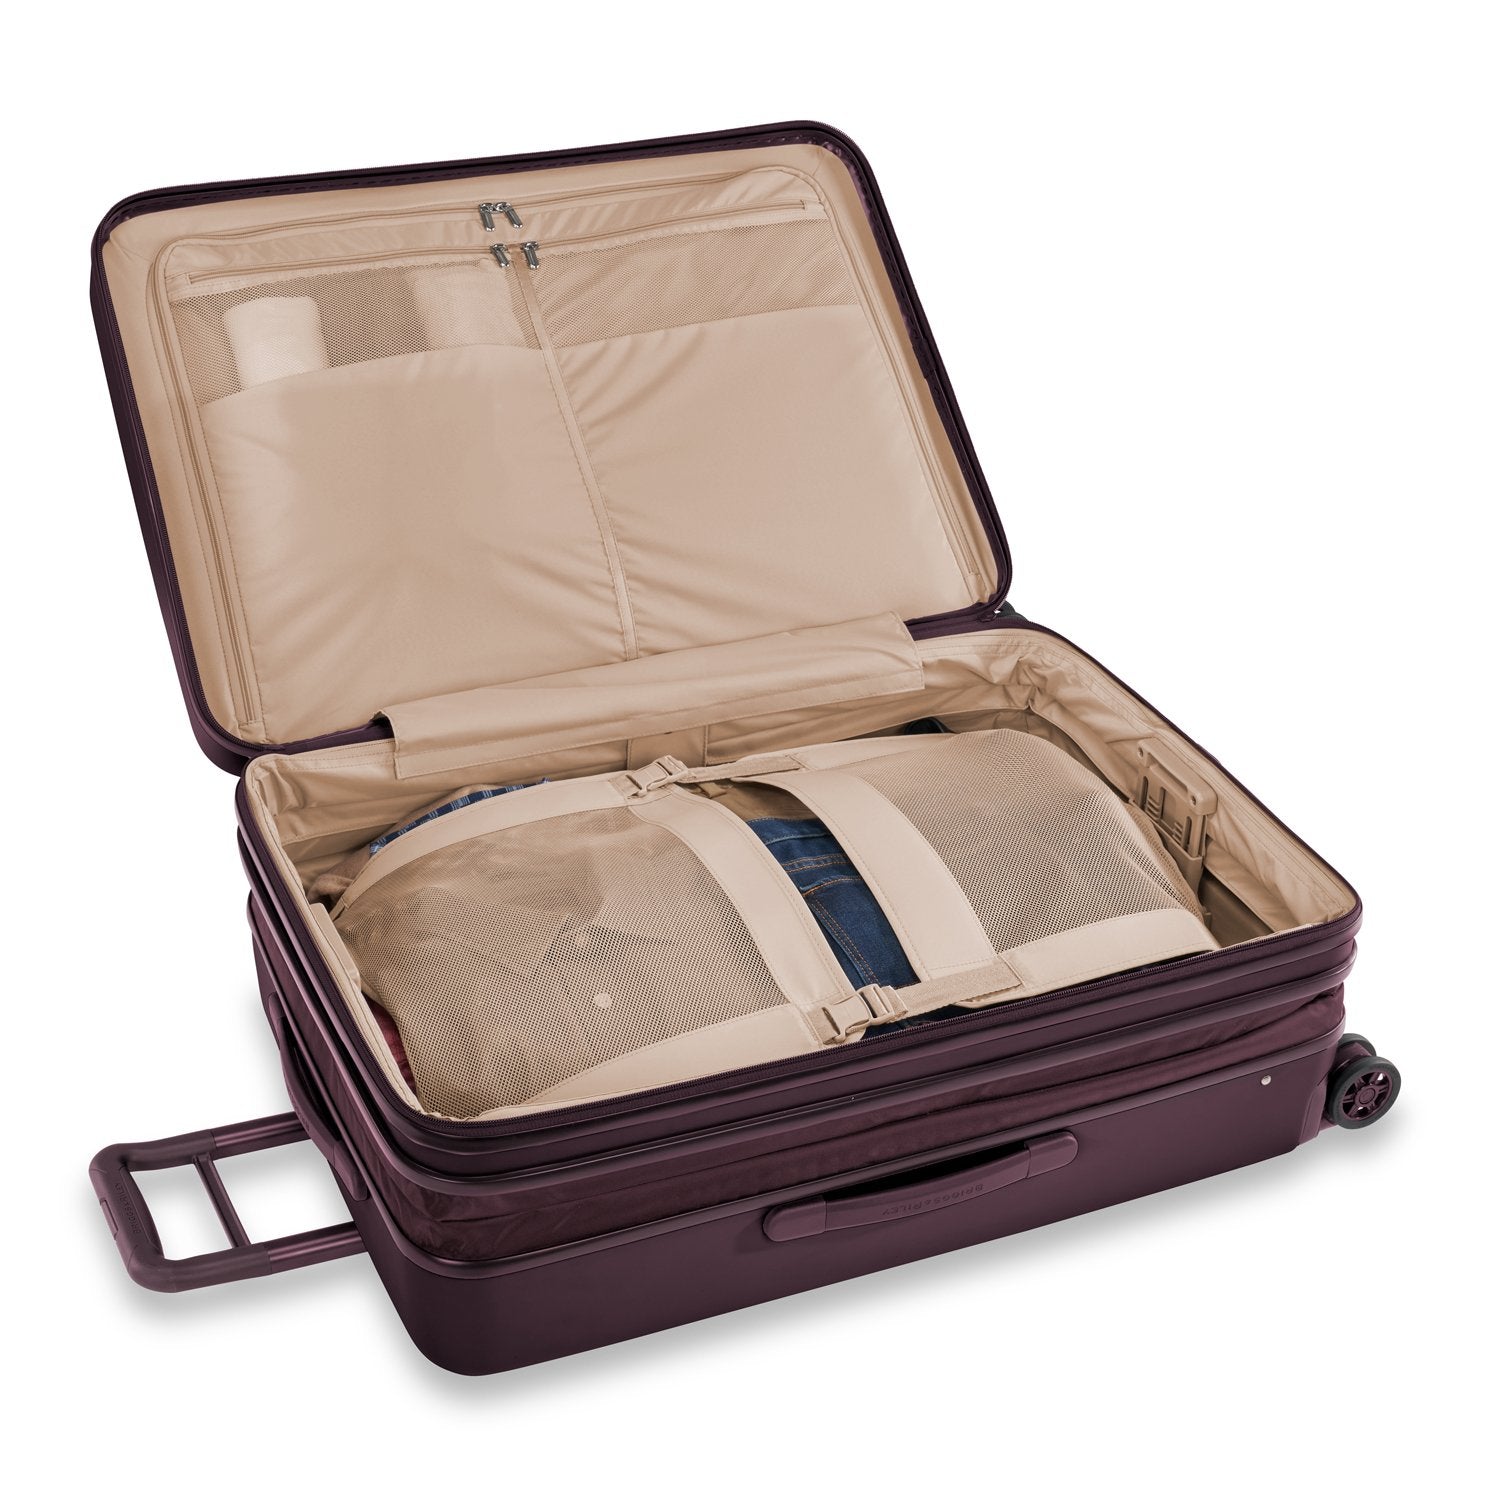 Briggs & Riley Sympatico 2.0 Large Expandable Spinner Plum